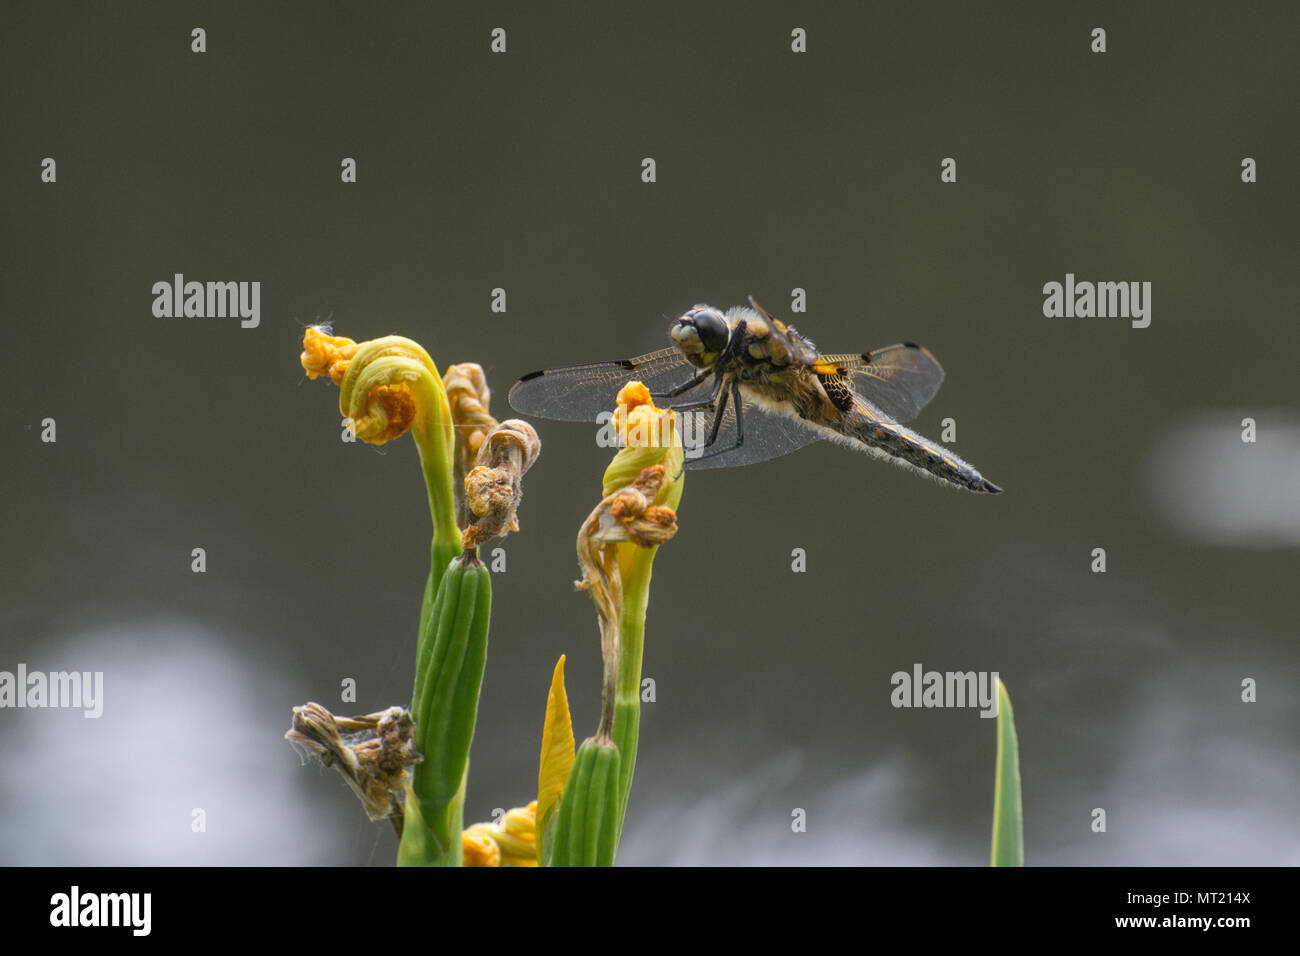 Four-spotted chaser dragonfly (Libellula quadrimaculata) perched on yellow flag irises at the edge of a pond, UK Stock Photo